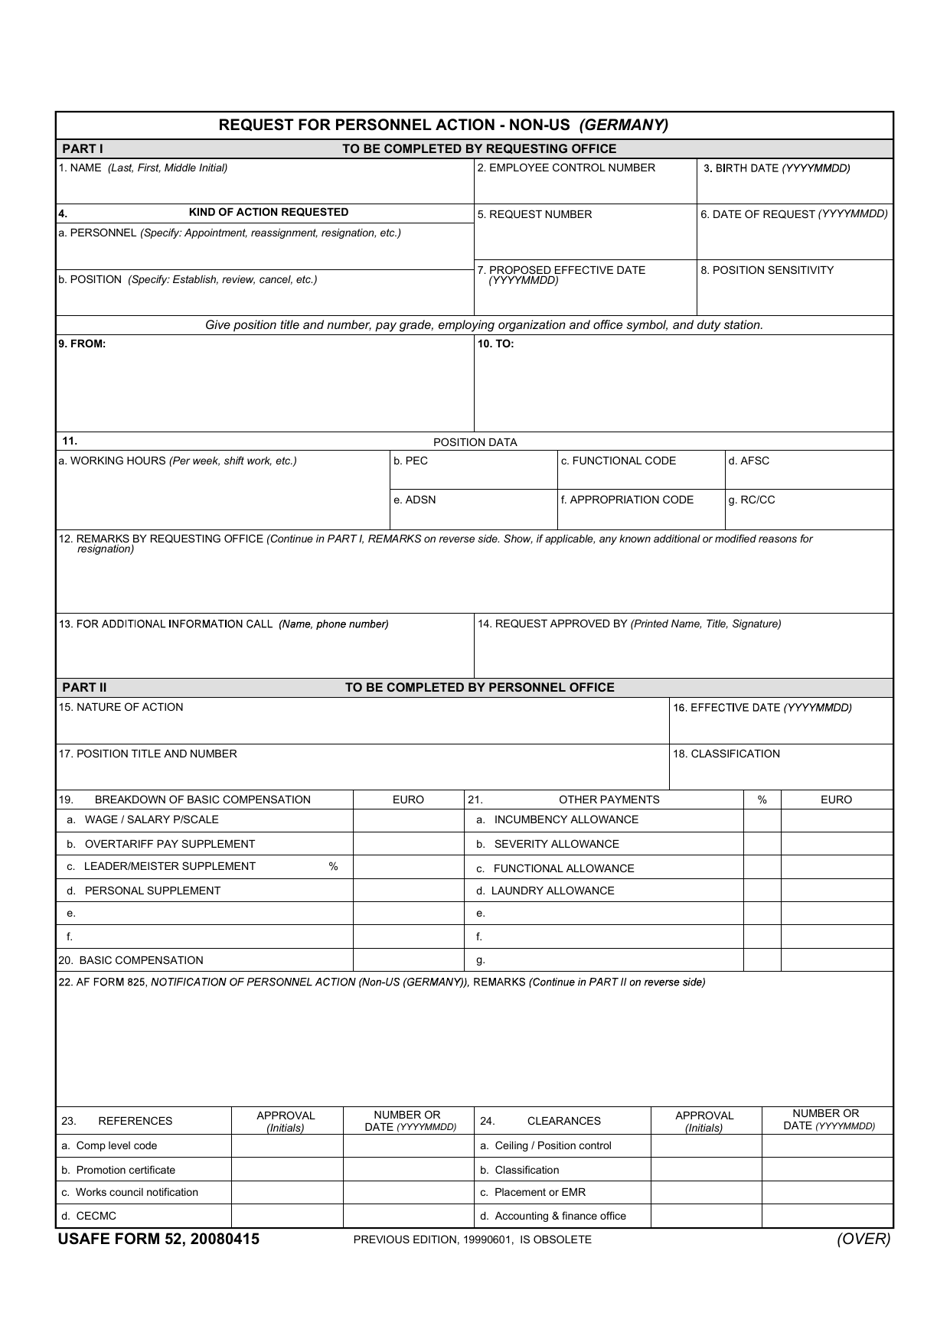 USAFE Form 52 Request for Personnel Action - Non-US (Germany), Page 1